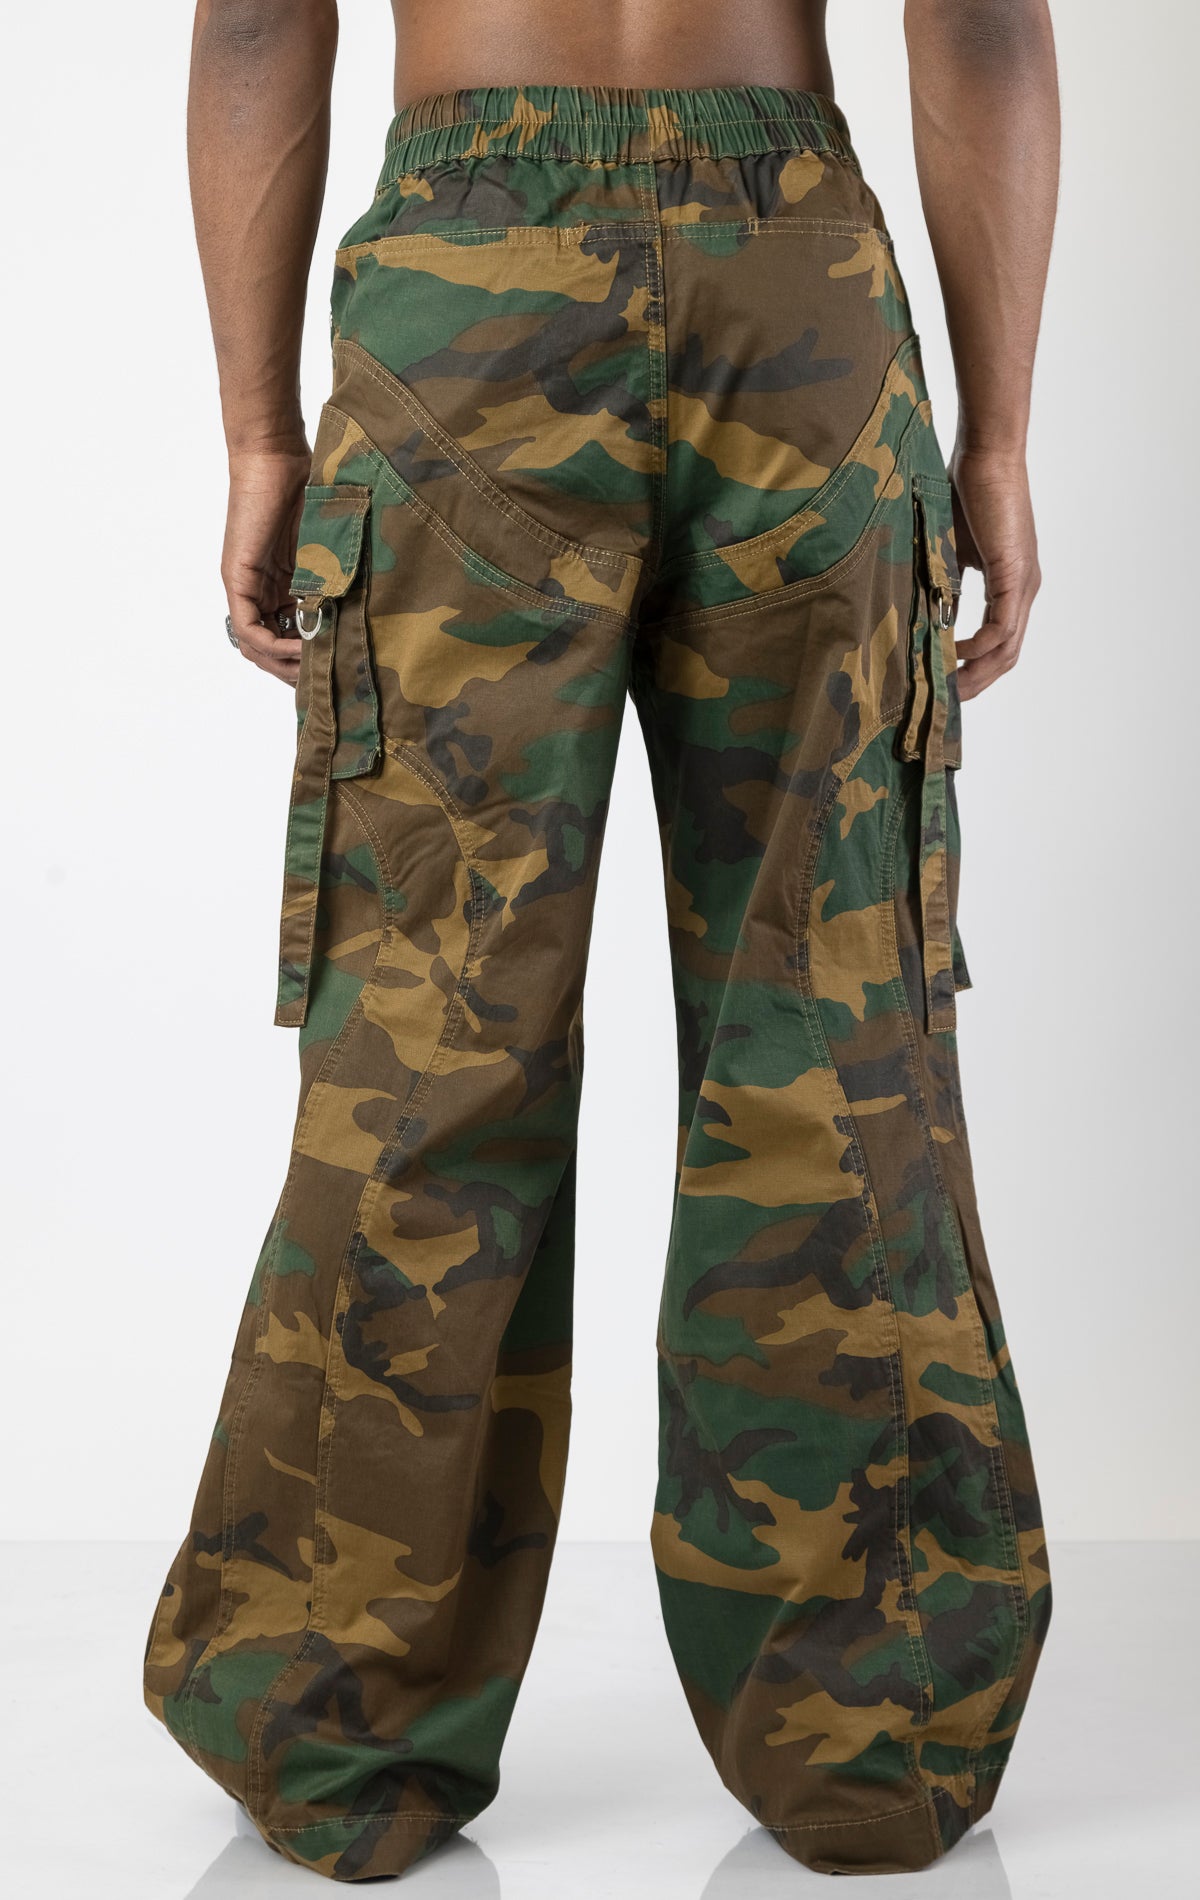 Men's baggy cargo pants in camo. The pants feature a wide, relaxed fit from the waist down, paneled construction, spacious cargo pockets with loop closures and functional tightening straps, and custom hardware. Made from a blend of 98% cotton and 2% spandex.